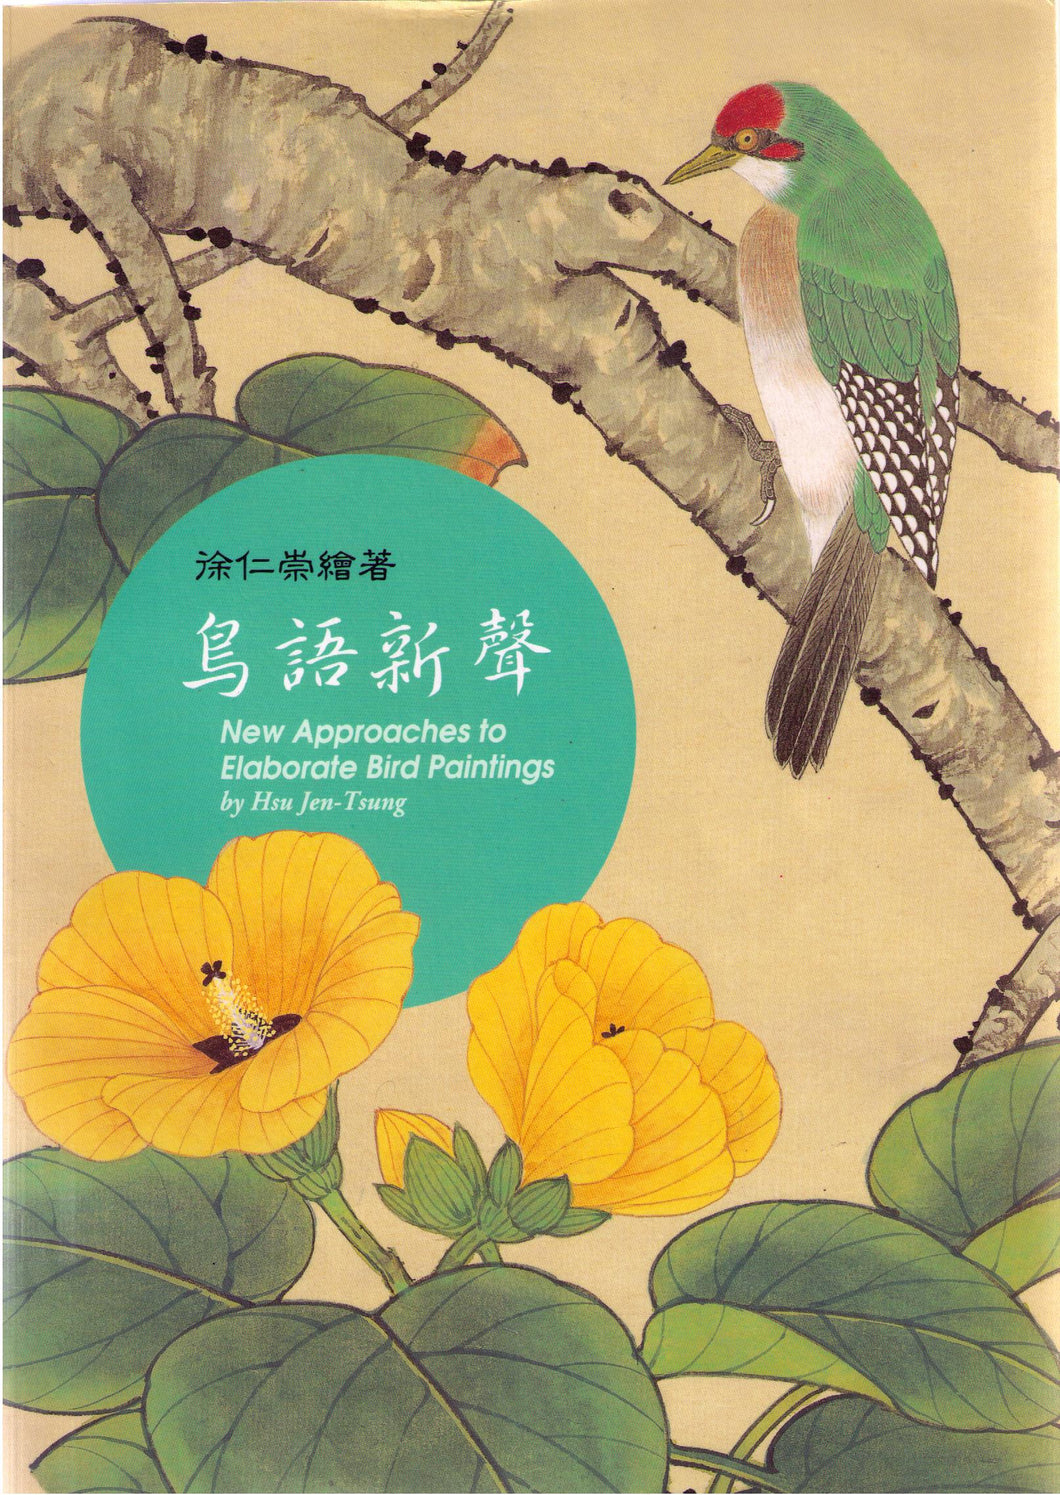 New Approaches to Elaborate Bird Paintings 鳥語新聲